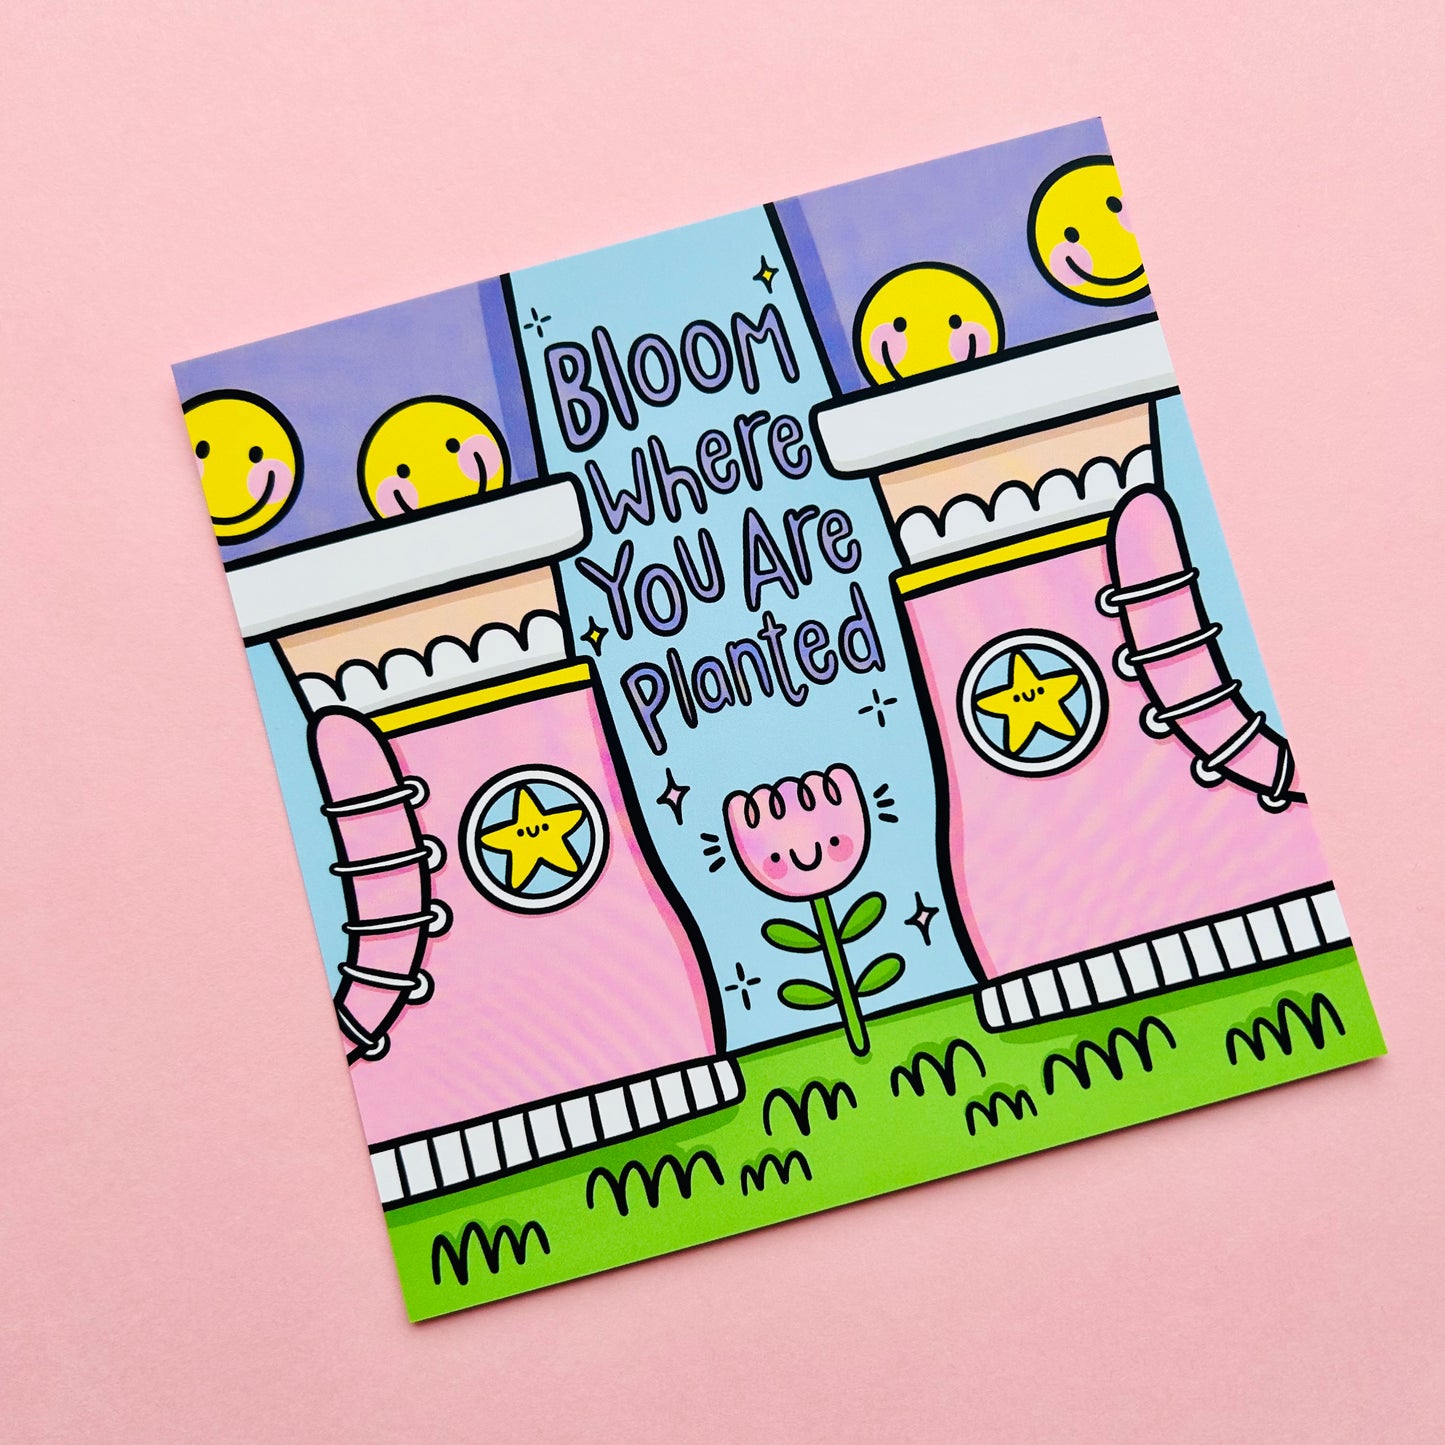 Bloom Where You Are Planted - Square Print